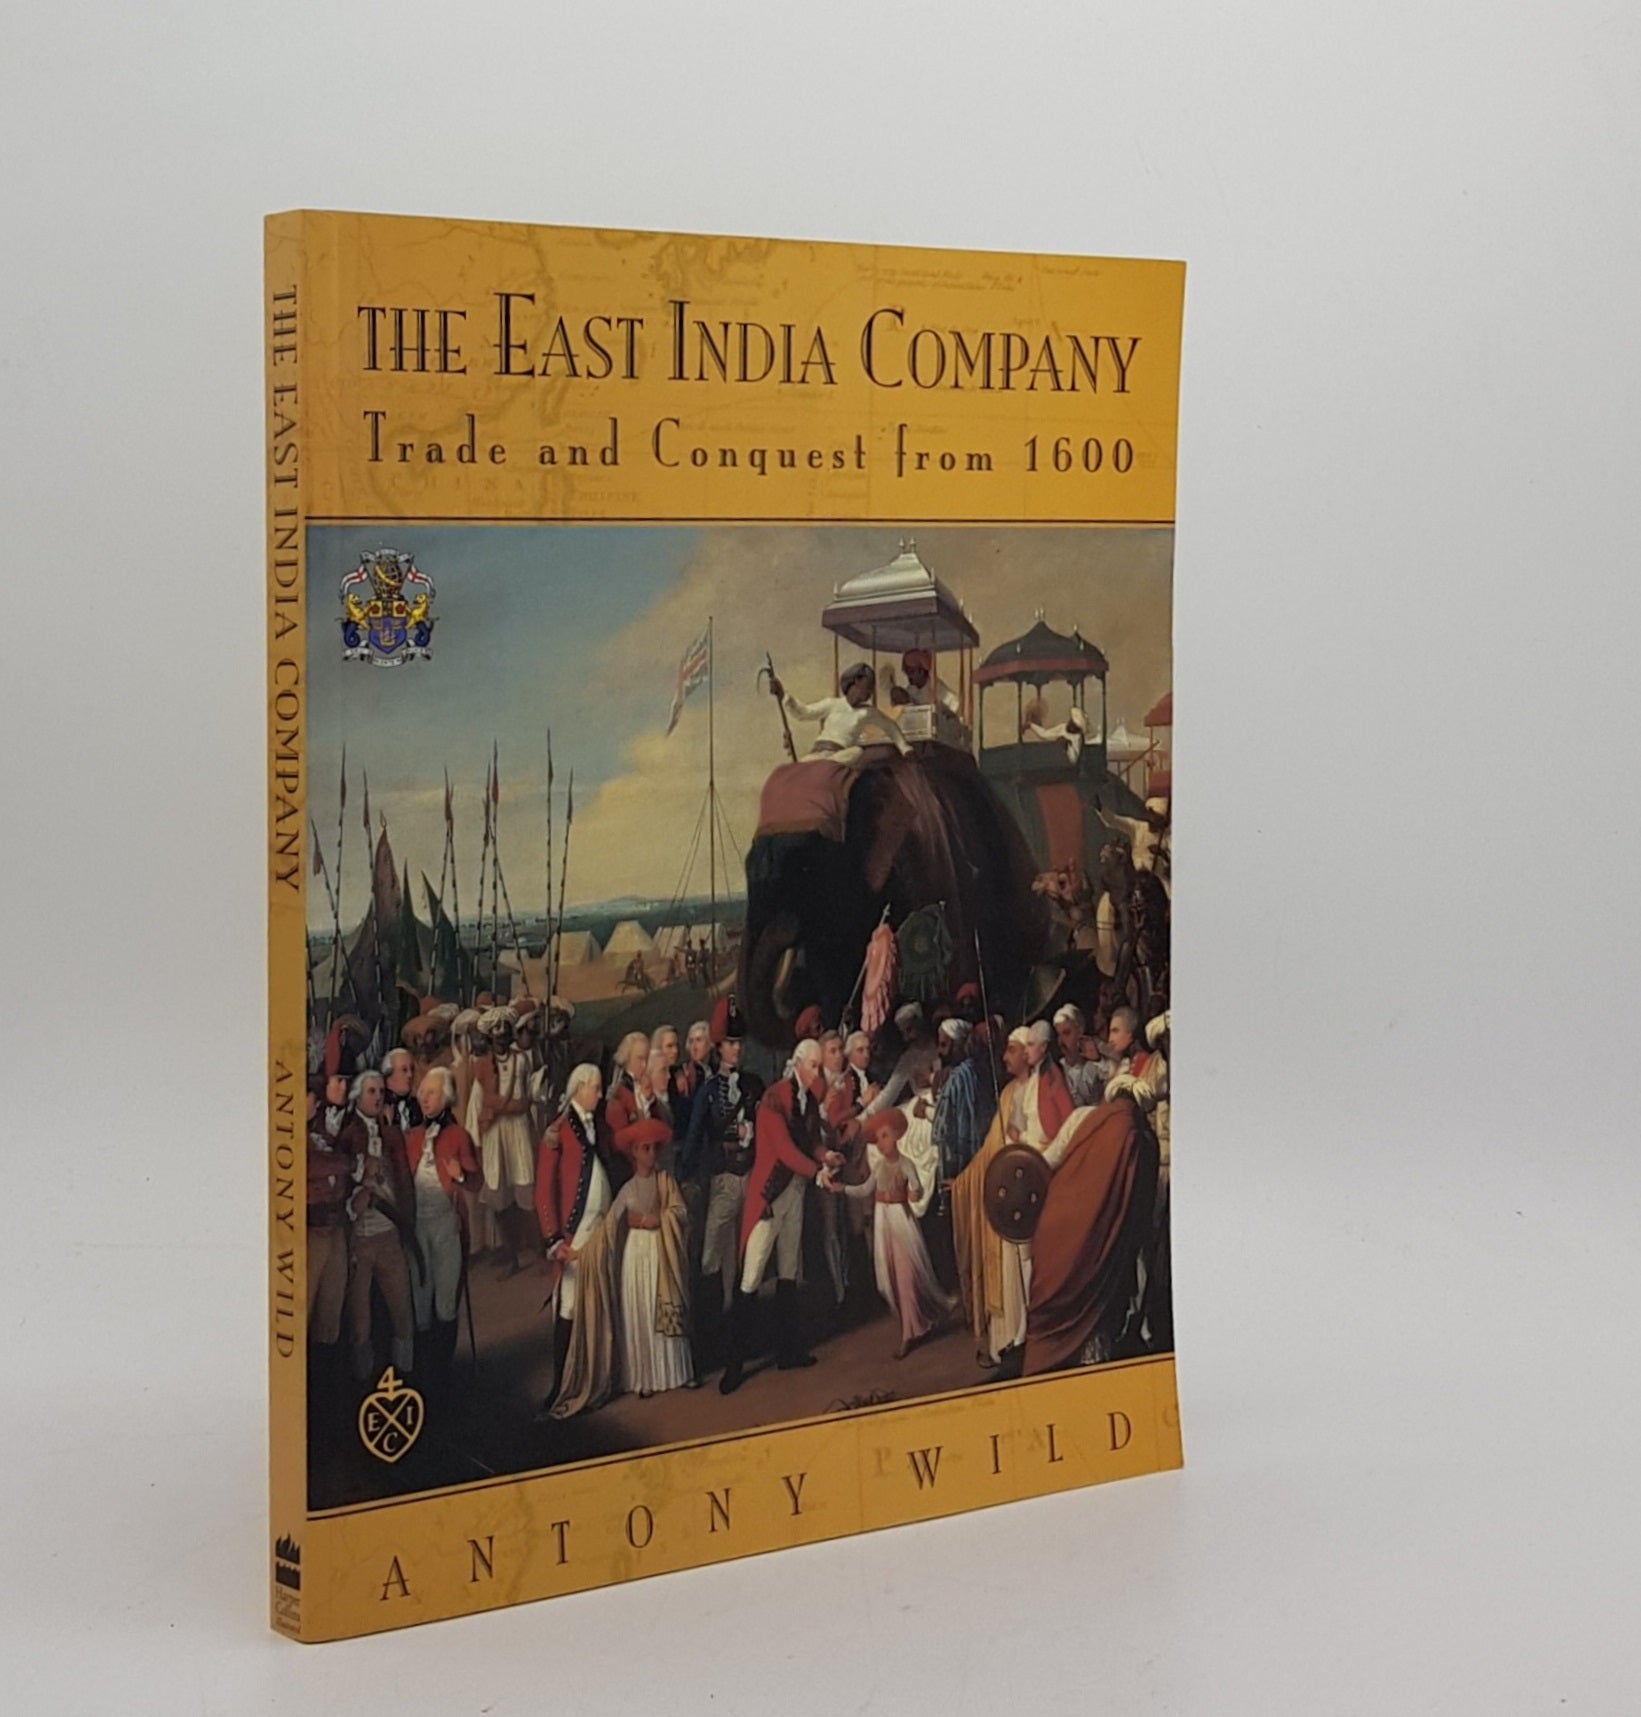 WILD Antony - The East India Company Trade and Conquest from 1600